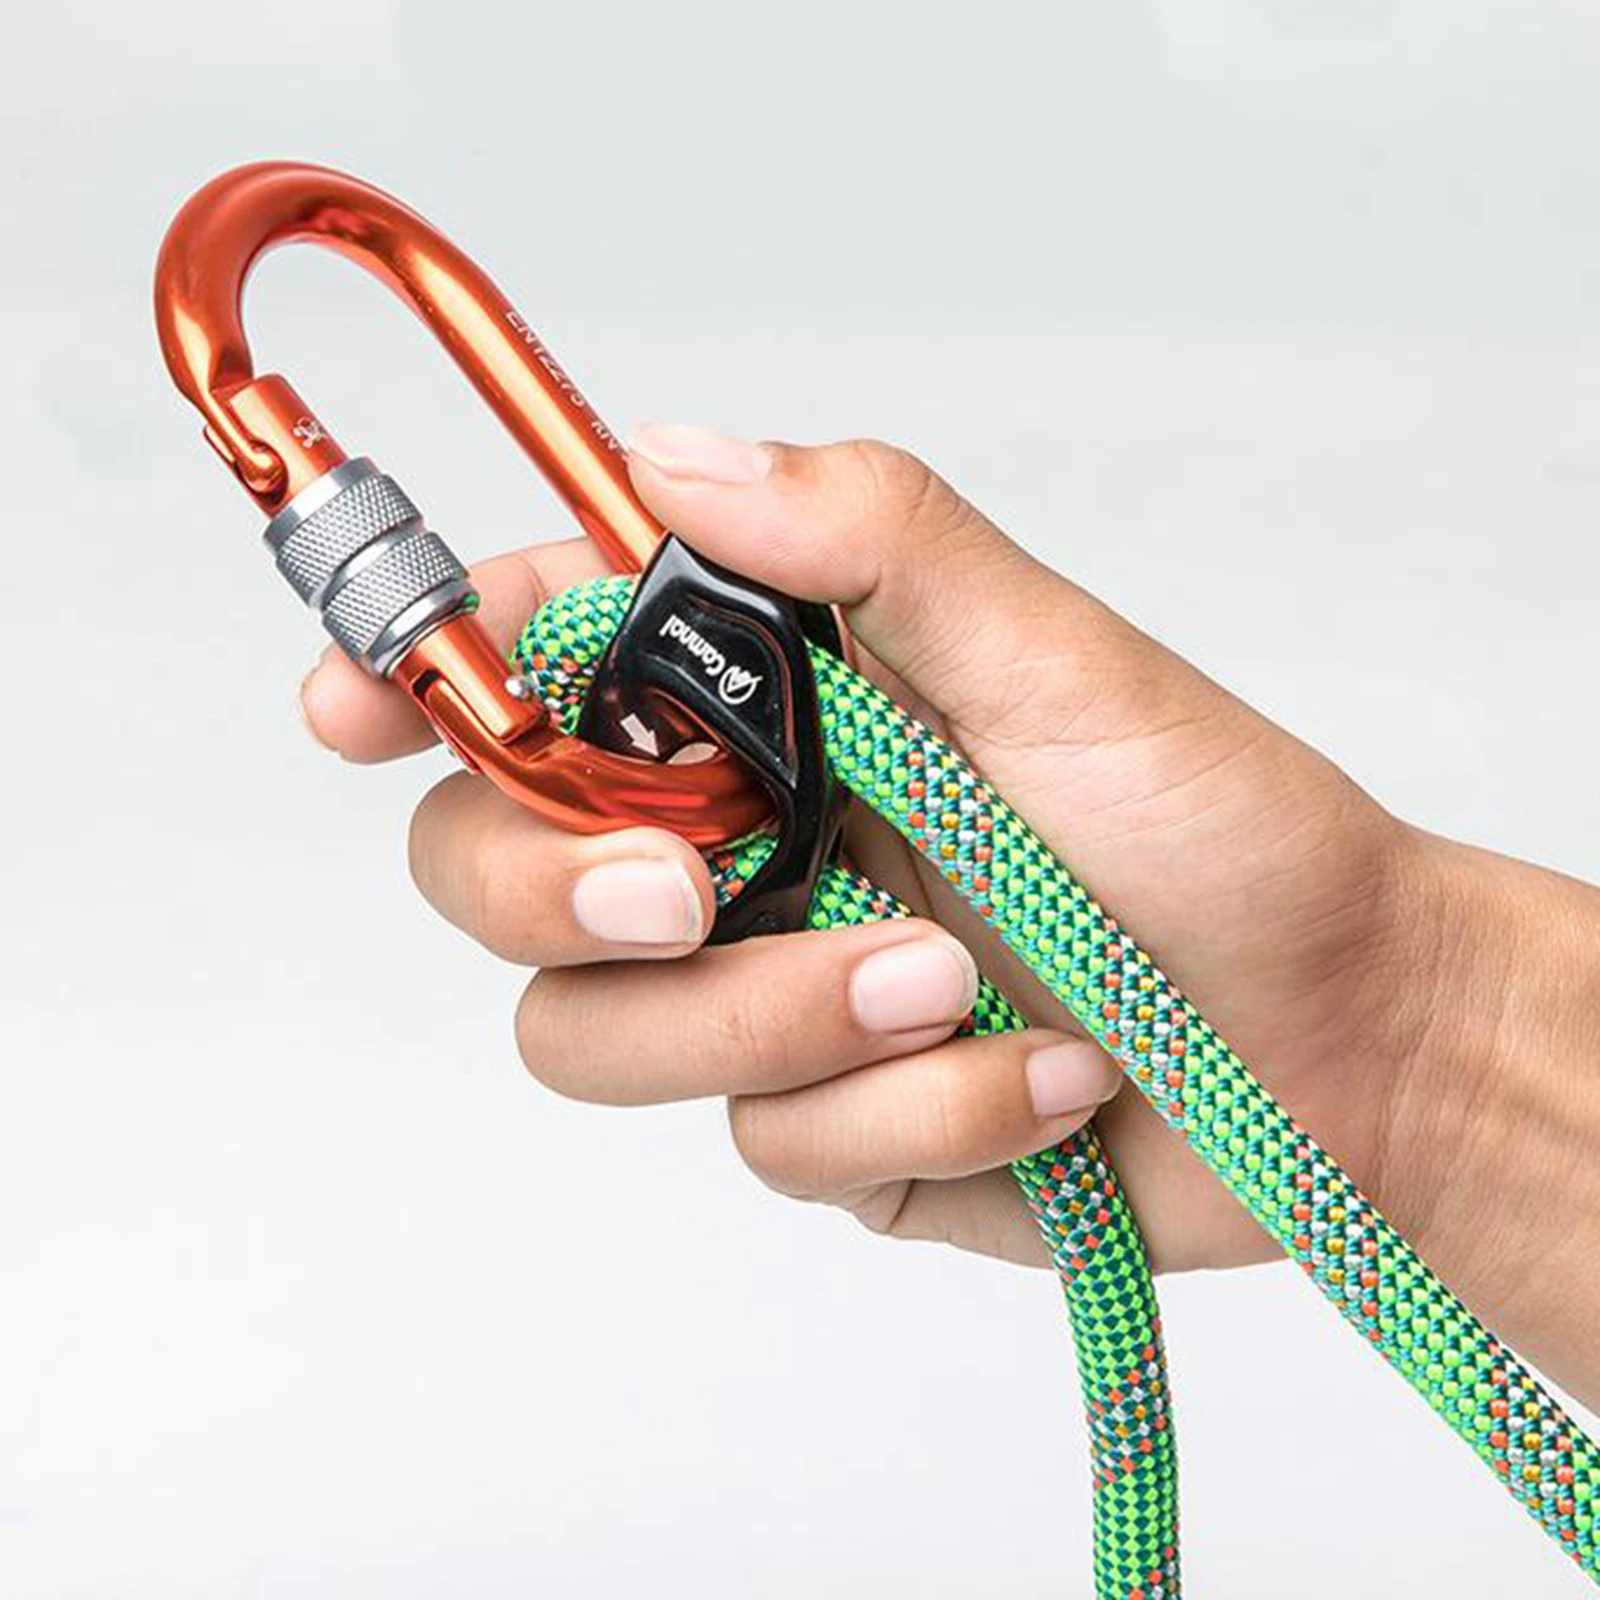 Positioning Lanyard with Extra Sturdy Dupont Line Rope Adjustable Restraint Work Climbing Accessories